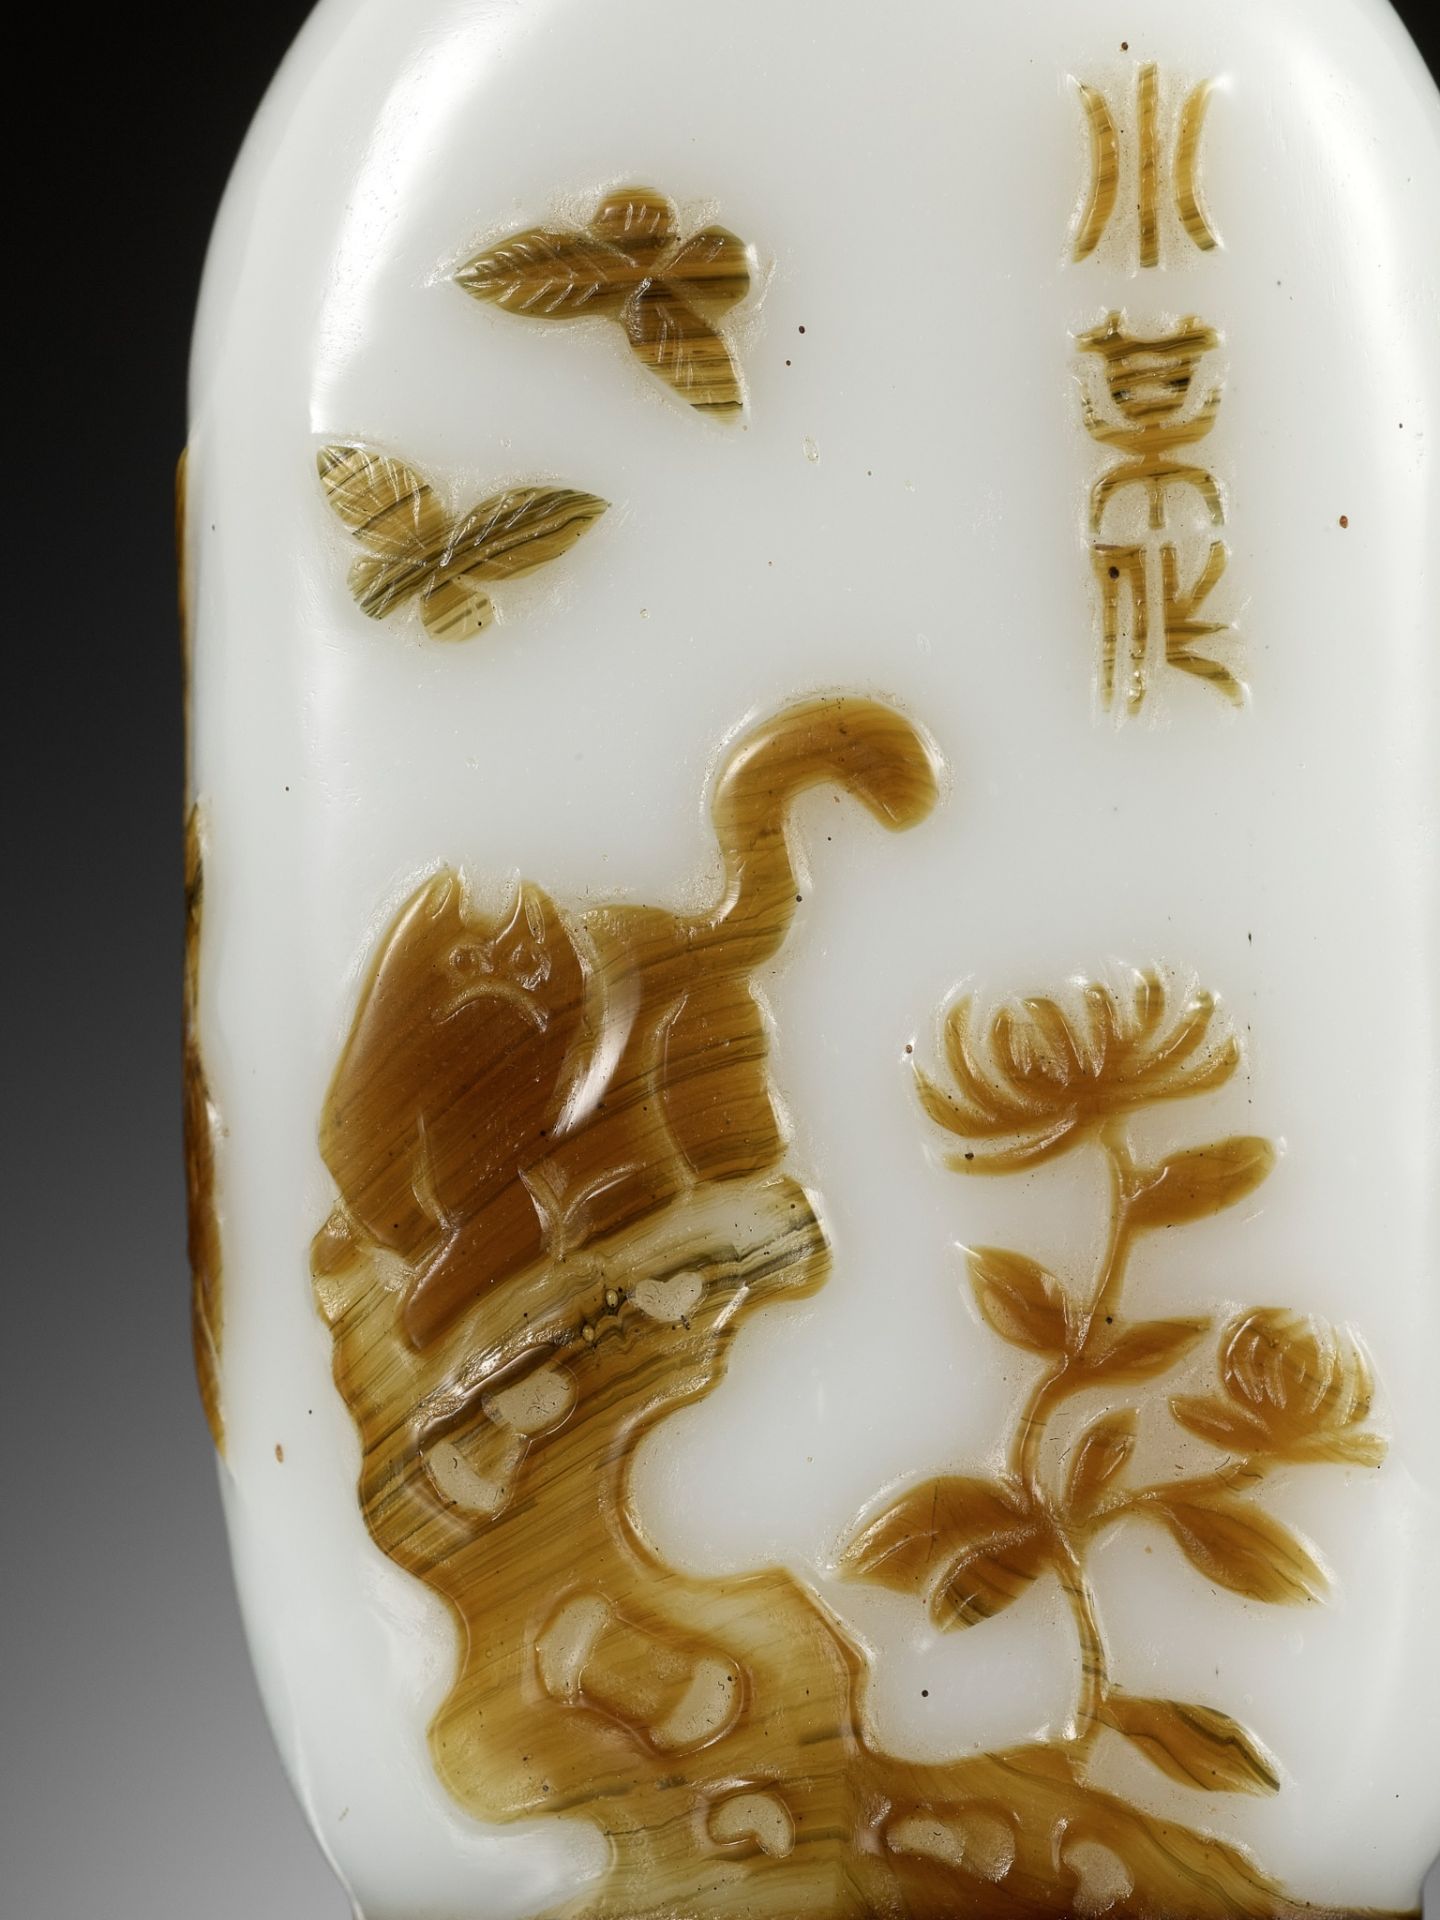 AN INSCRIBED OVERLAY GLASS ‘CAT AND BUTTERFLY’ SNUFF BOTTLE, BY WANG SU, YANGZHOU SCHOOL, 1820-1840 - Image 7 of 19